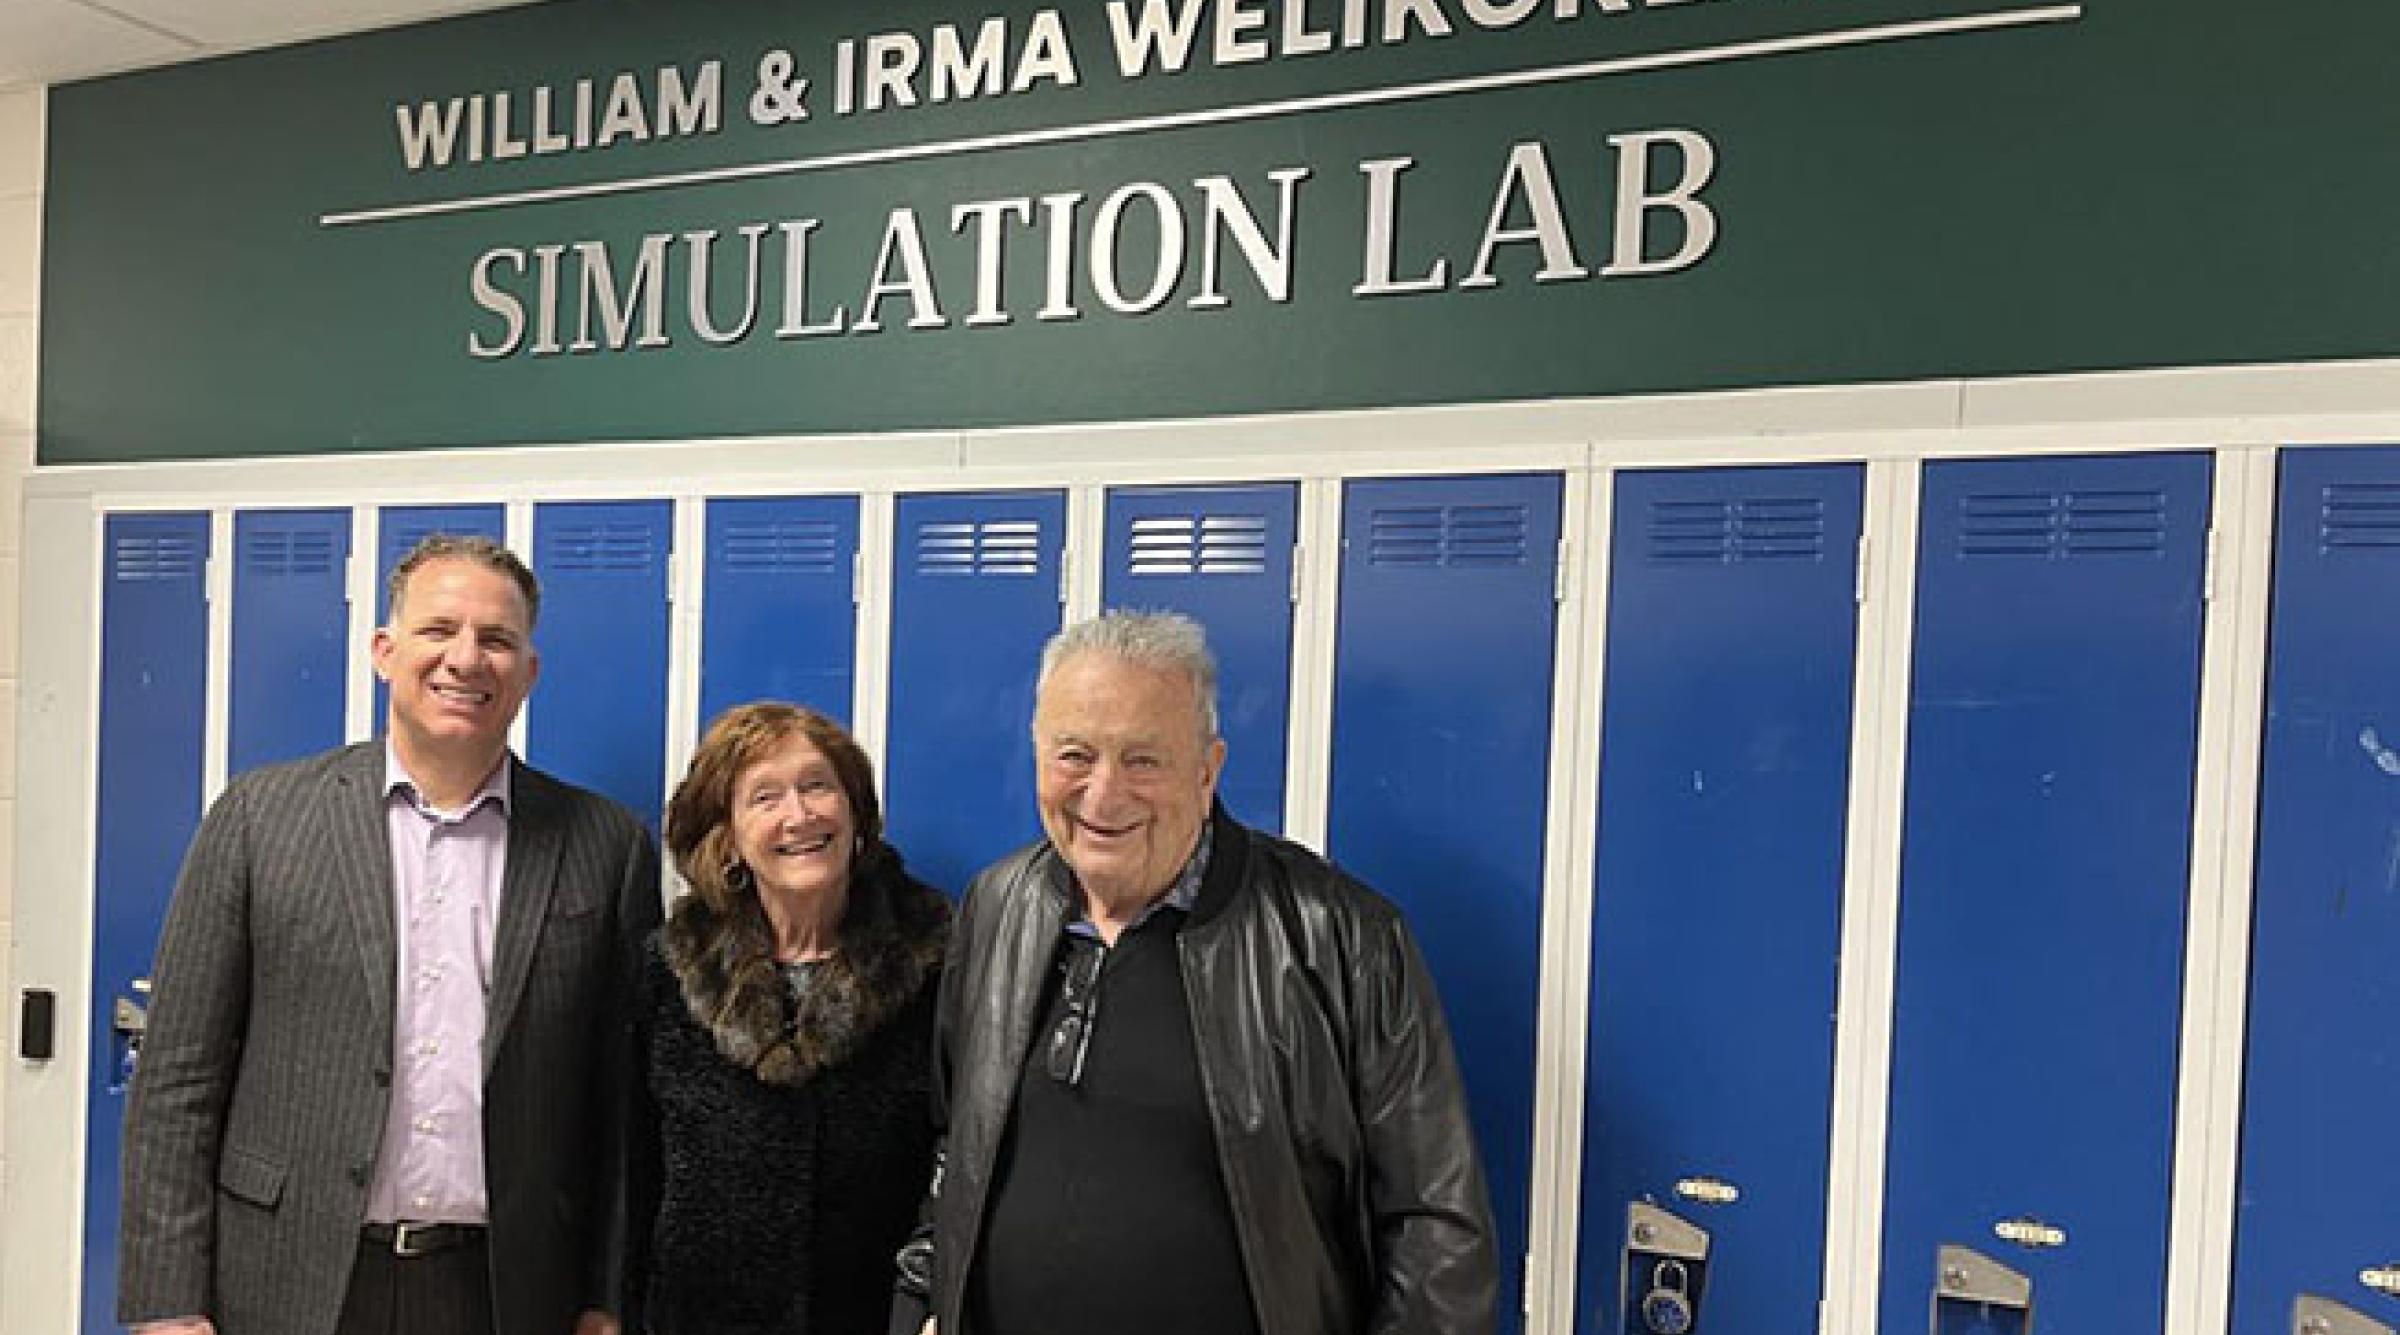 Stuart Cullum with Welikoklad's in front of Simulation Lab